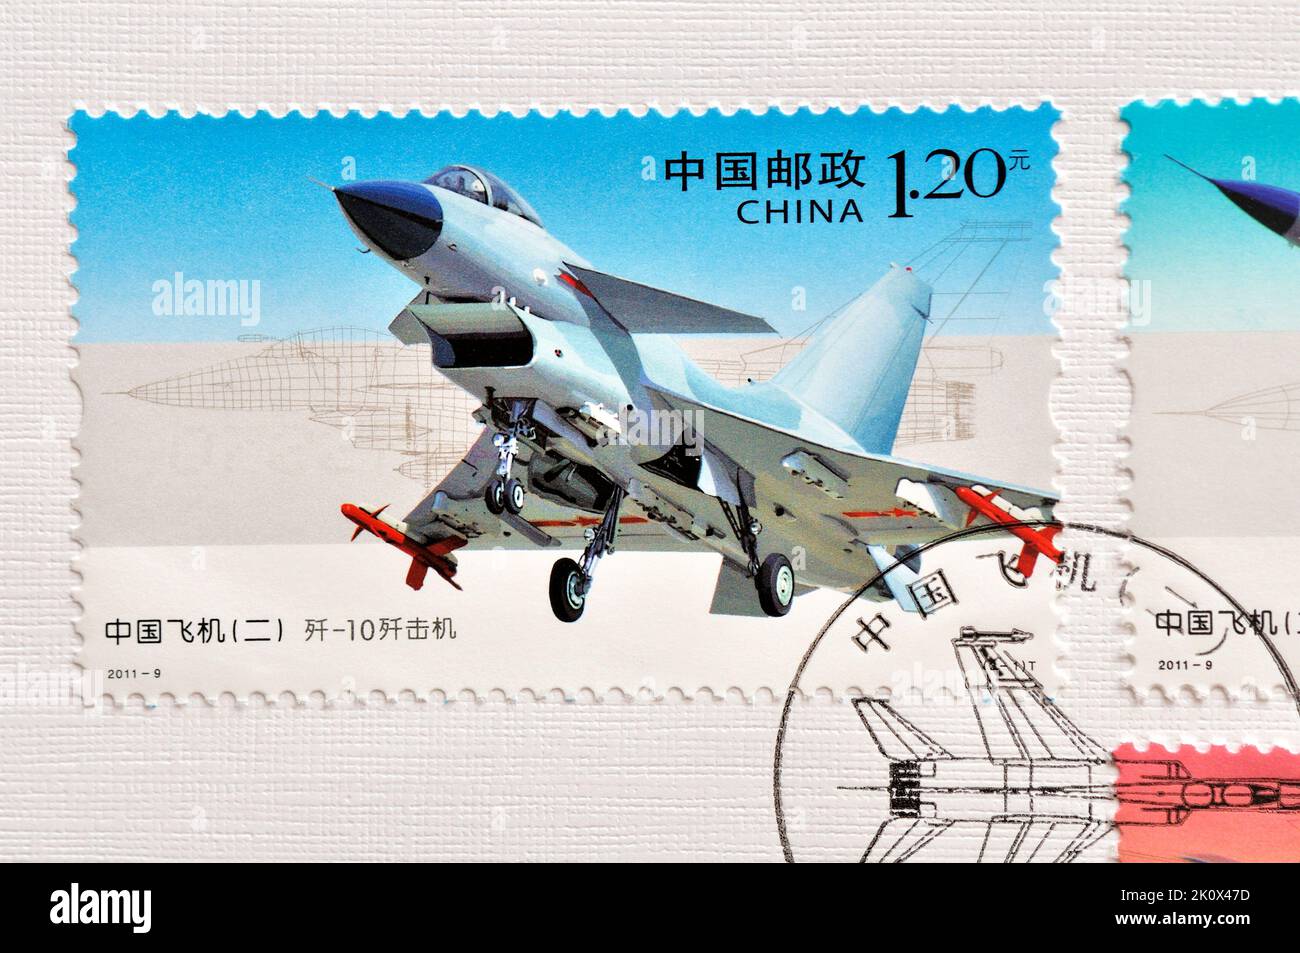 CHINA - CIRCA 2011: A stamps printed in China shows 2011-9 Chinese Aircraft (2)  J-10 fighter， circa 2011. Stock Photo